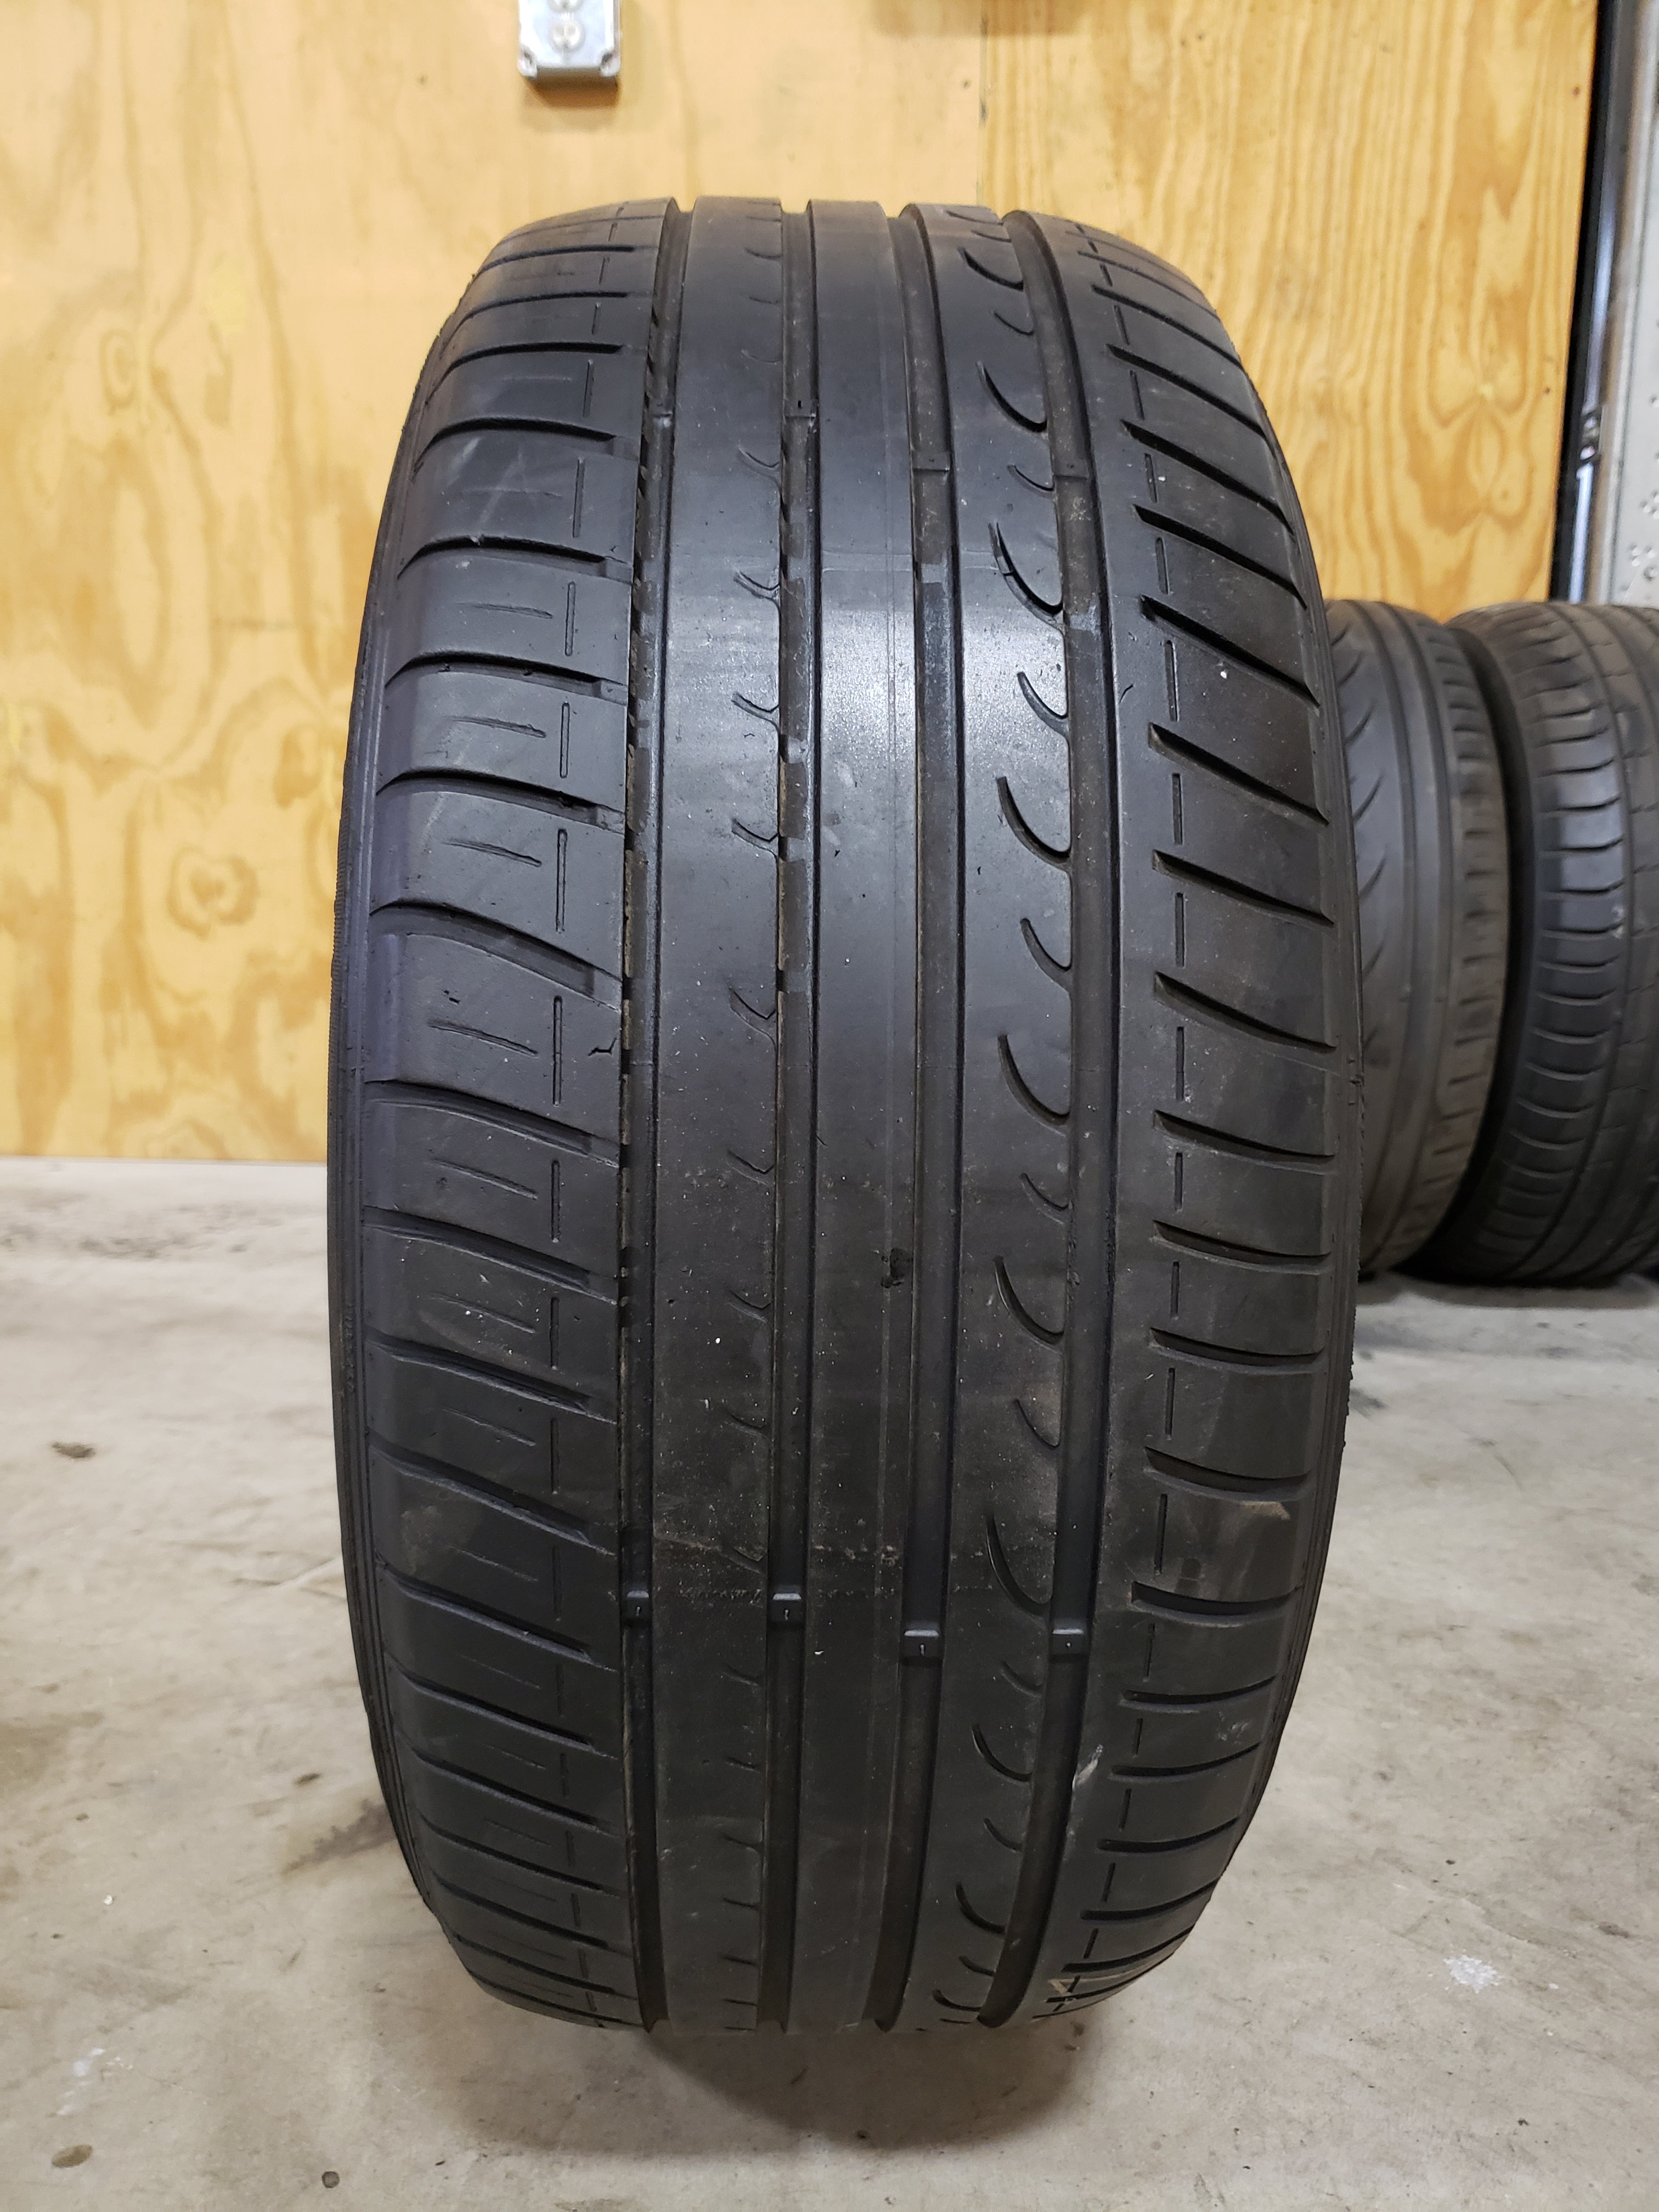 SINGLE 225/55R16 Dunlop SP Sport Fast Response 95V XL - Used Tires | – High  Tread Used Tires